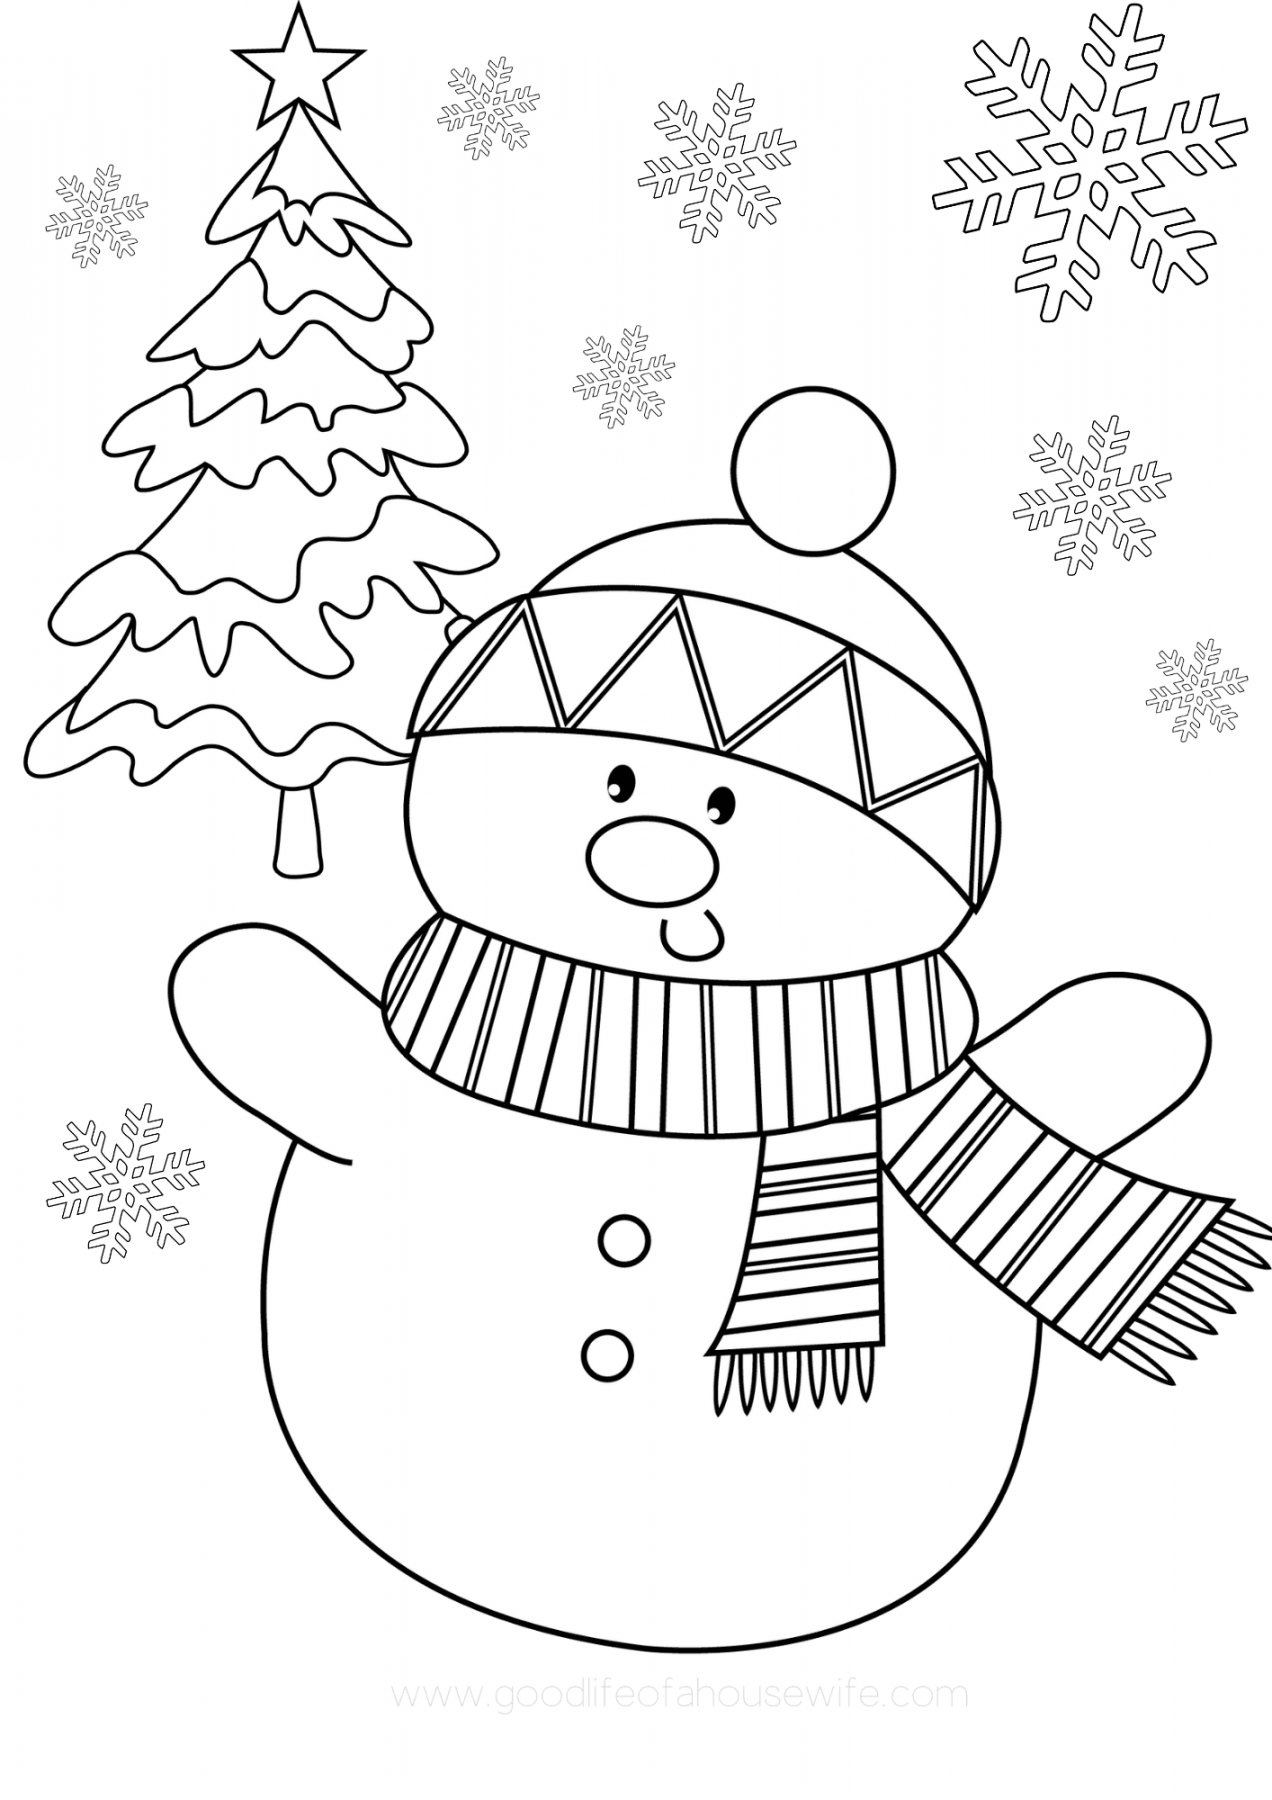 Free Printable Coloring Pages For Christmas - Printable - Free Printable Christmas Coloring Pages - Good Life of a Housewife